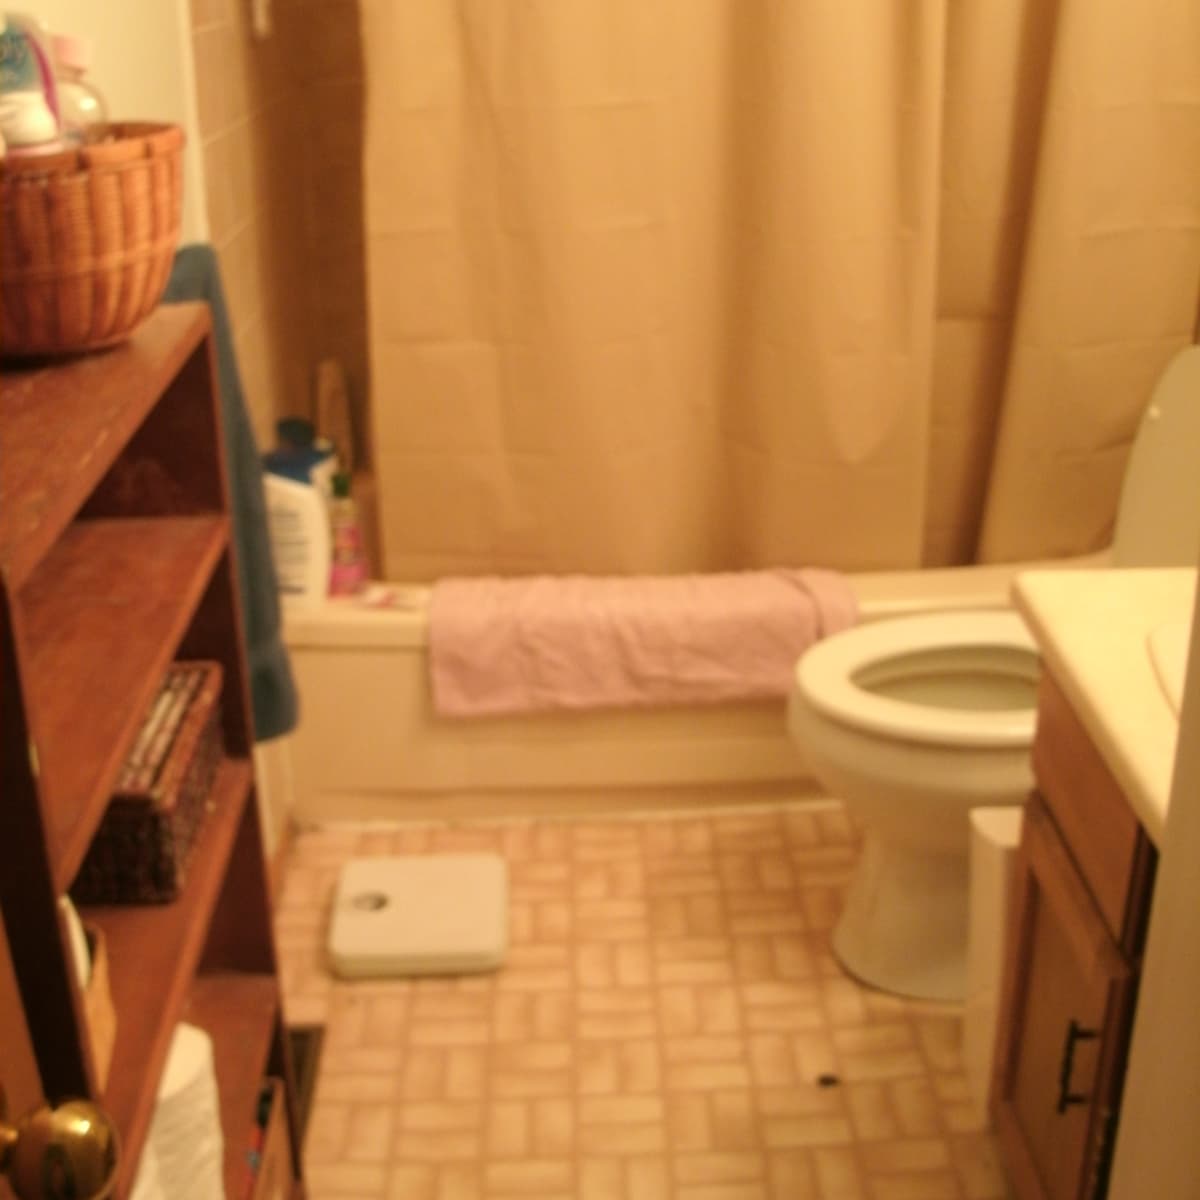 Help! I'll be moving into this house soon. Can't figure out how to store  toiletries in this cute but tiny bathroom, especially shampoo etc. Need  ideas. Ok to install things, but budget